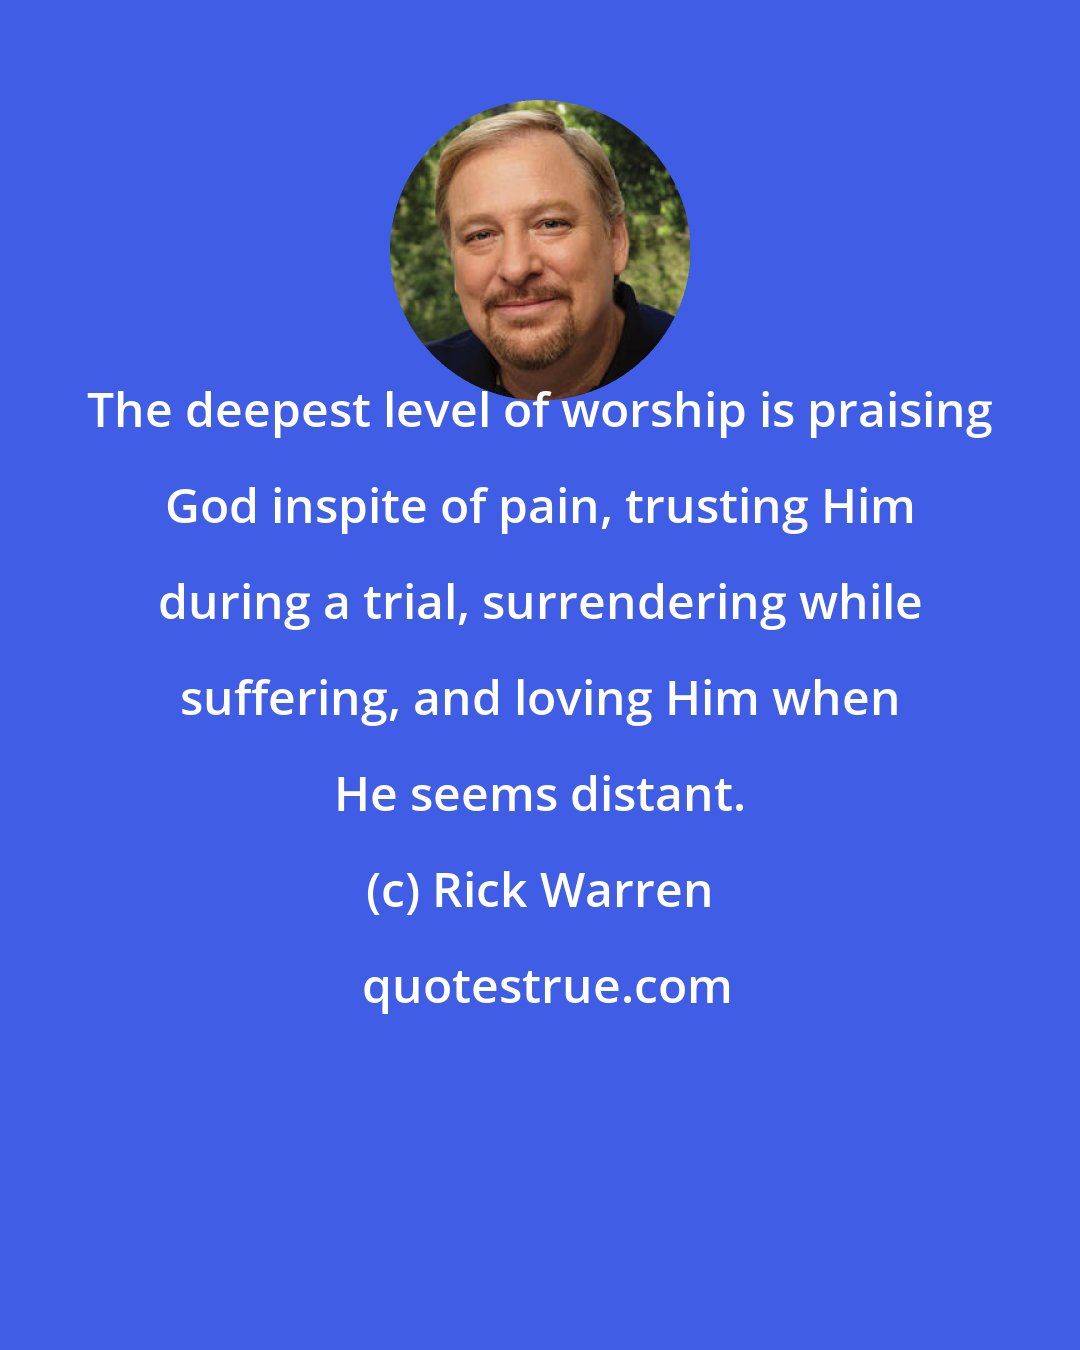 Rick Warren: The deepest level of worship is praising God inspite of pain, trusting Him during a trial, surrendering while suffering, and loving Him when He seems distant.